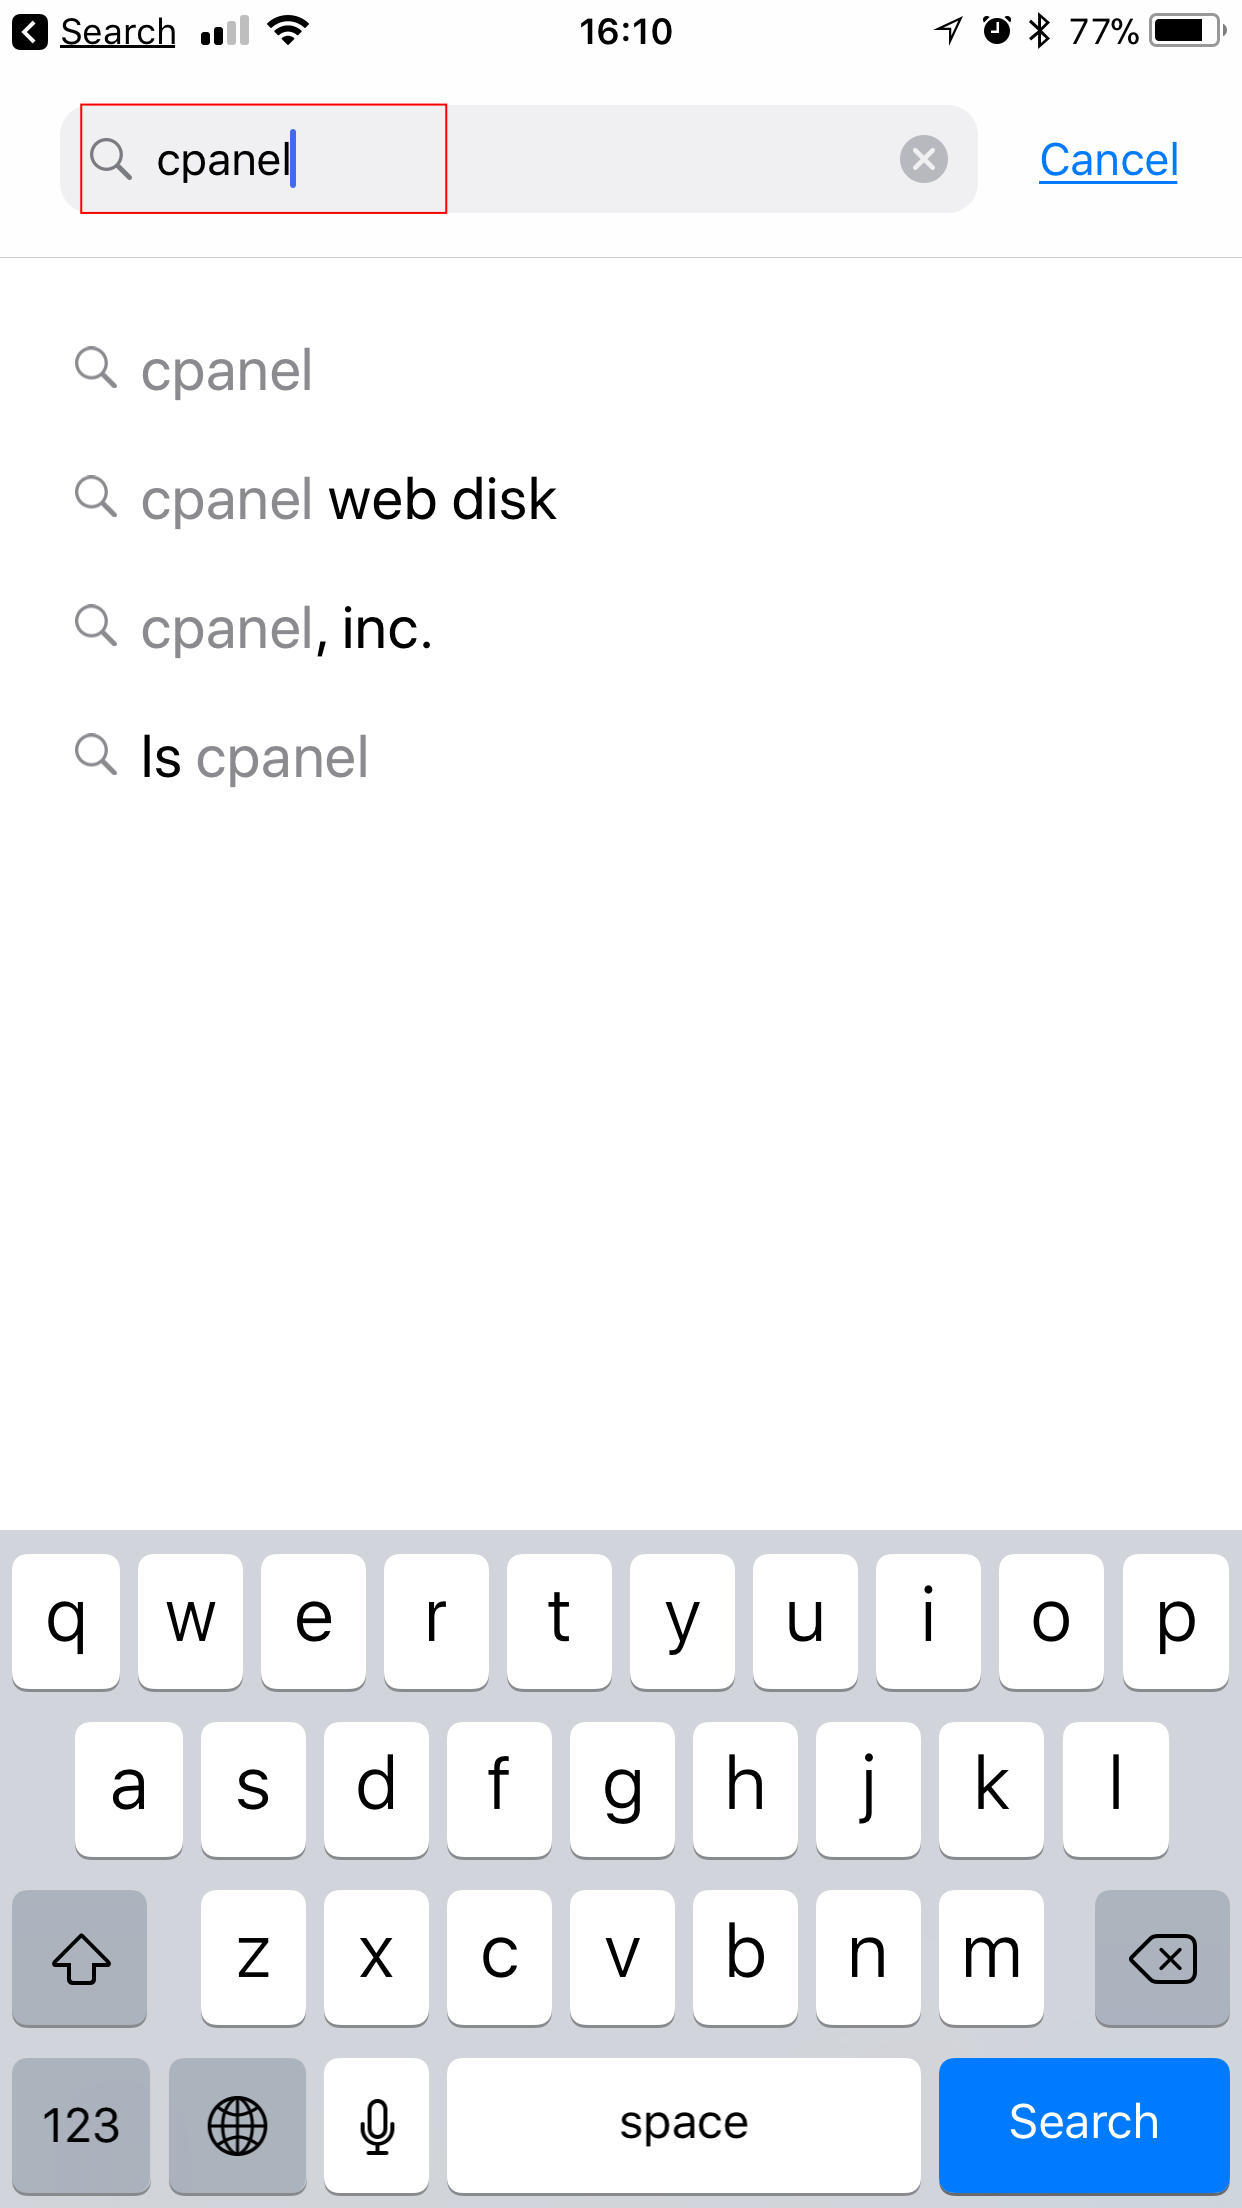 App Store search displaying results for cpanel